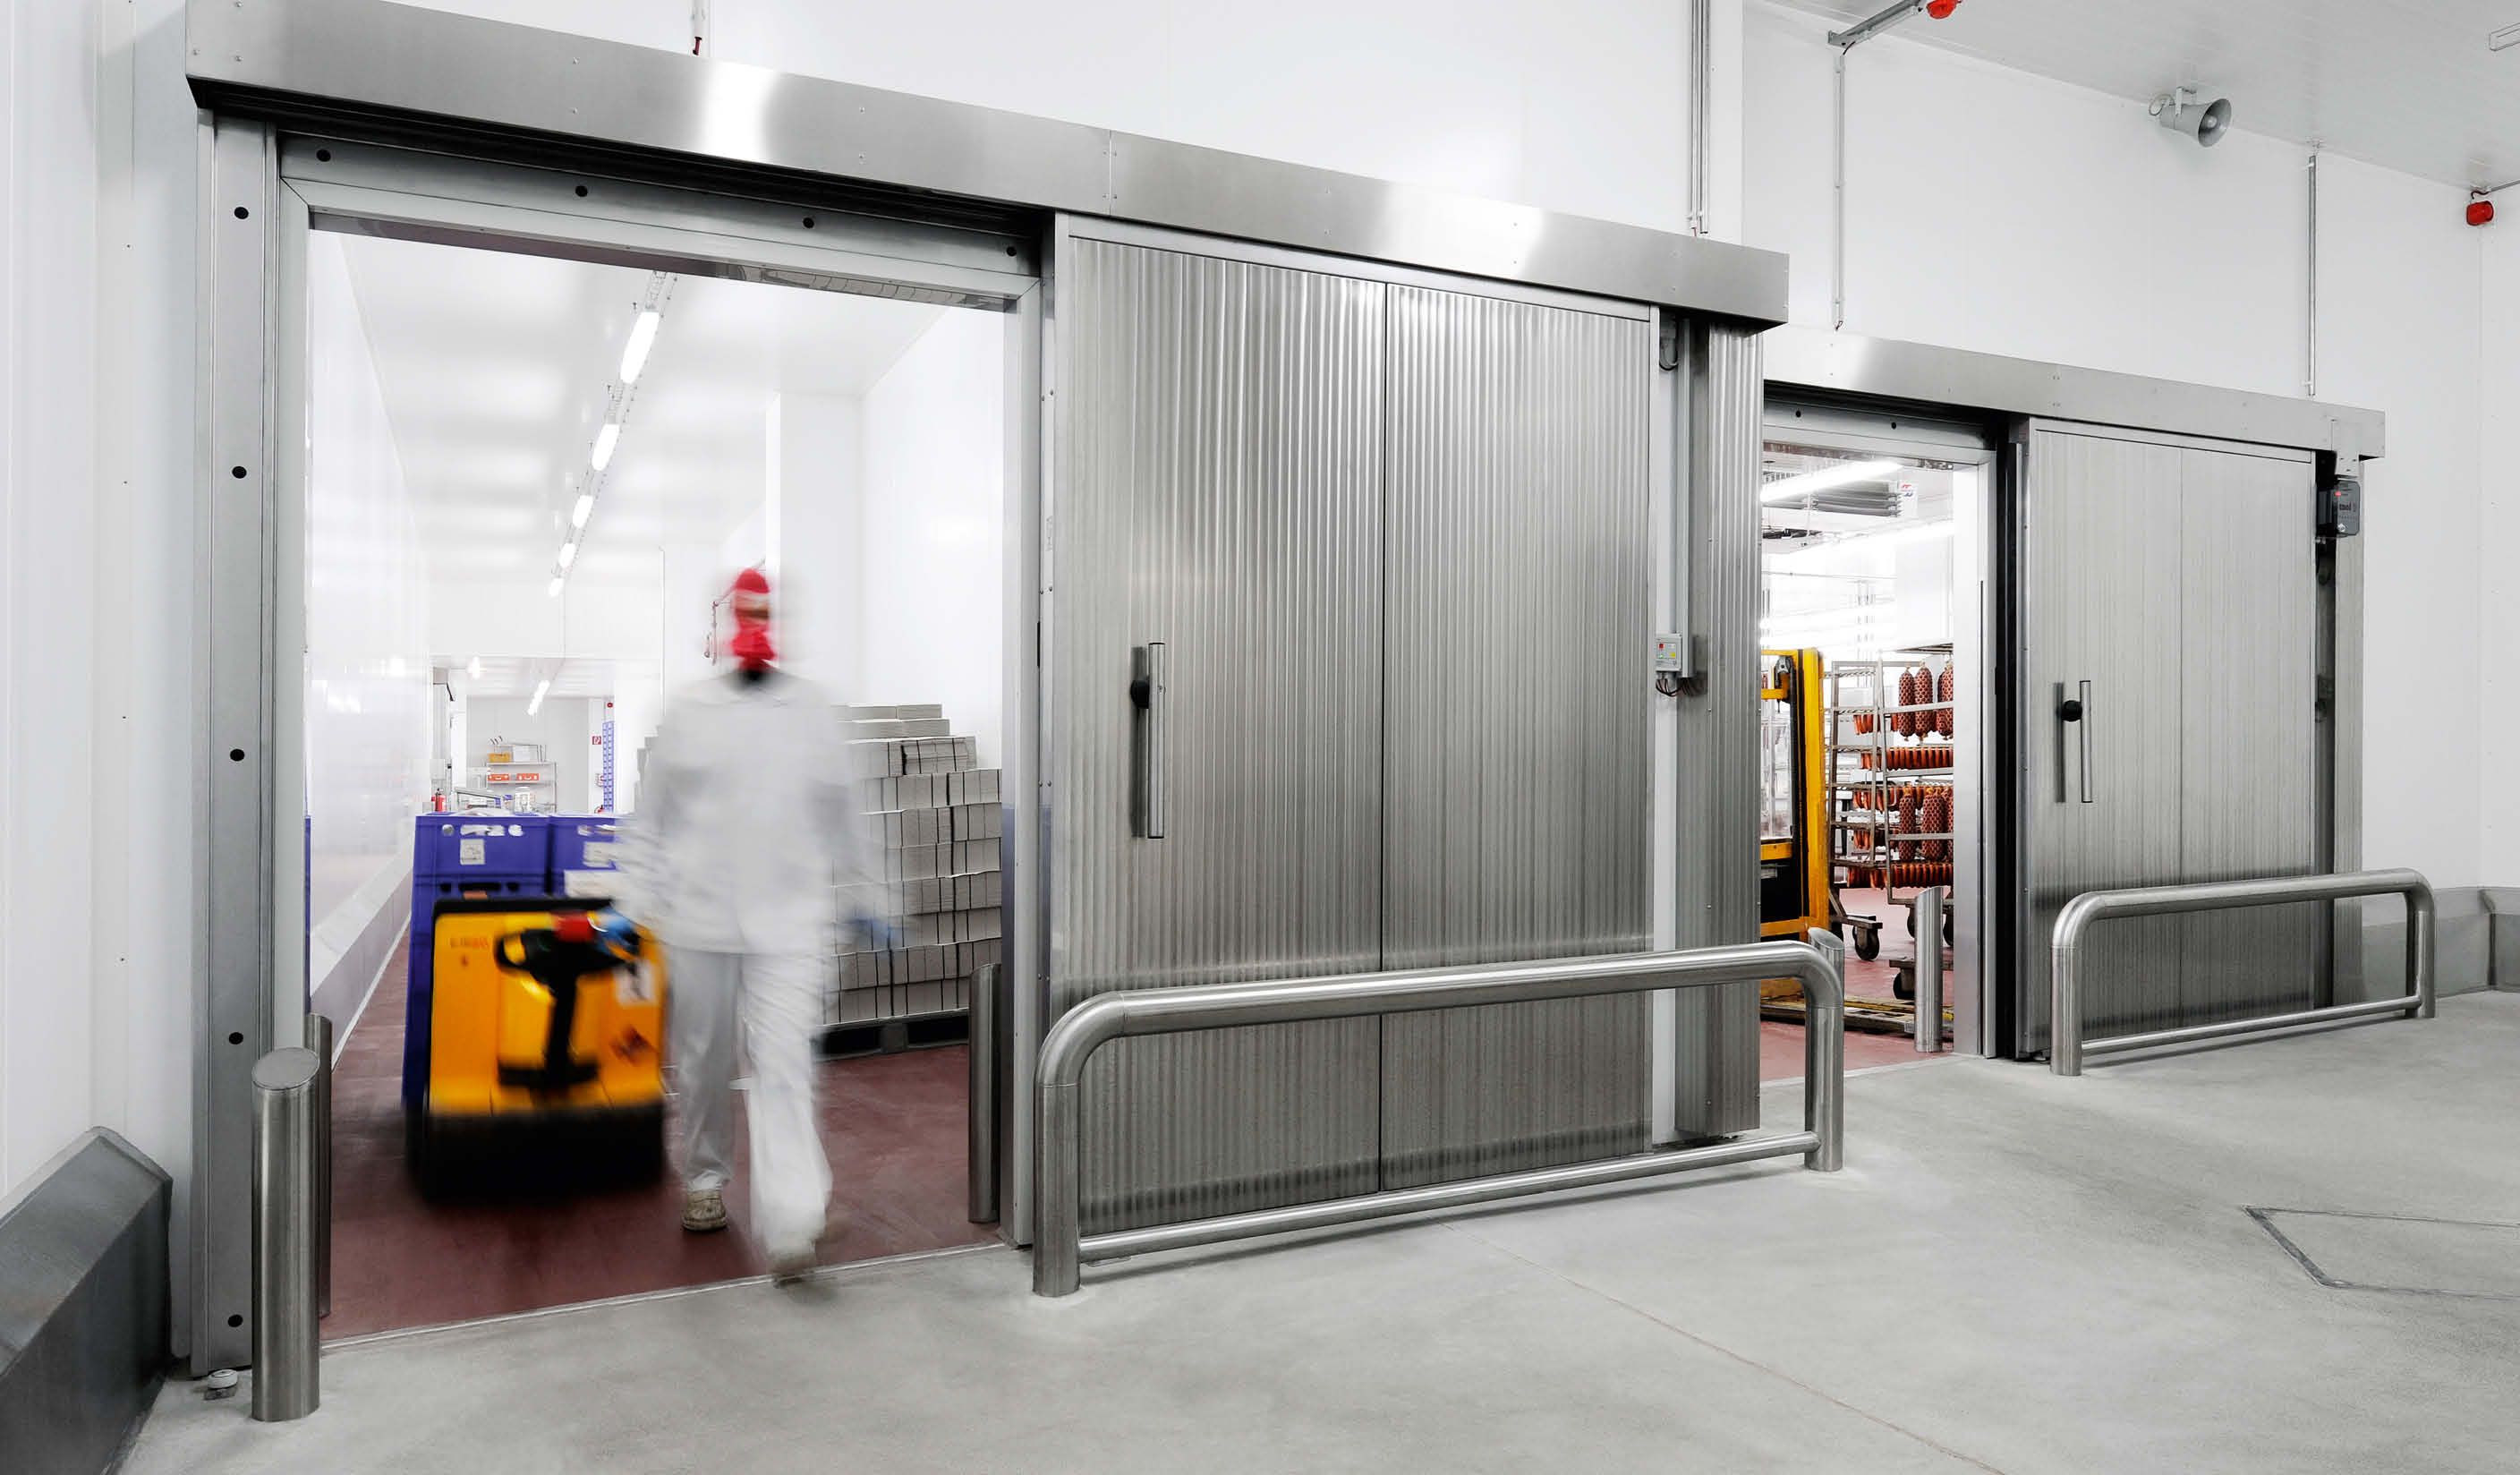 KTS-T90 Fire rated sliding door for freezers with 90 minutes fire protections properties and german approvals